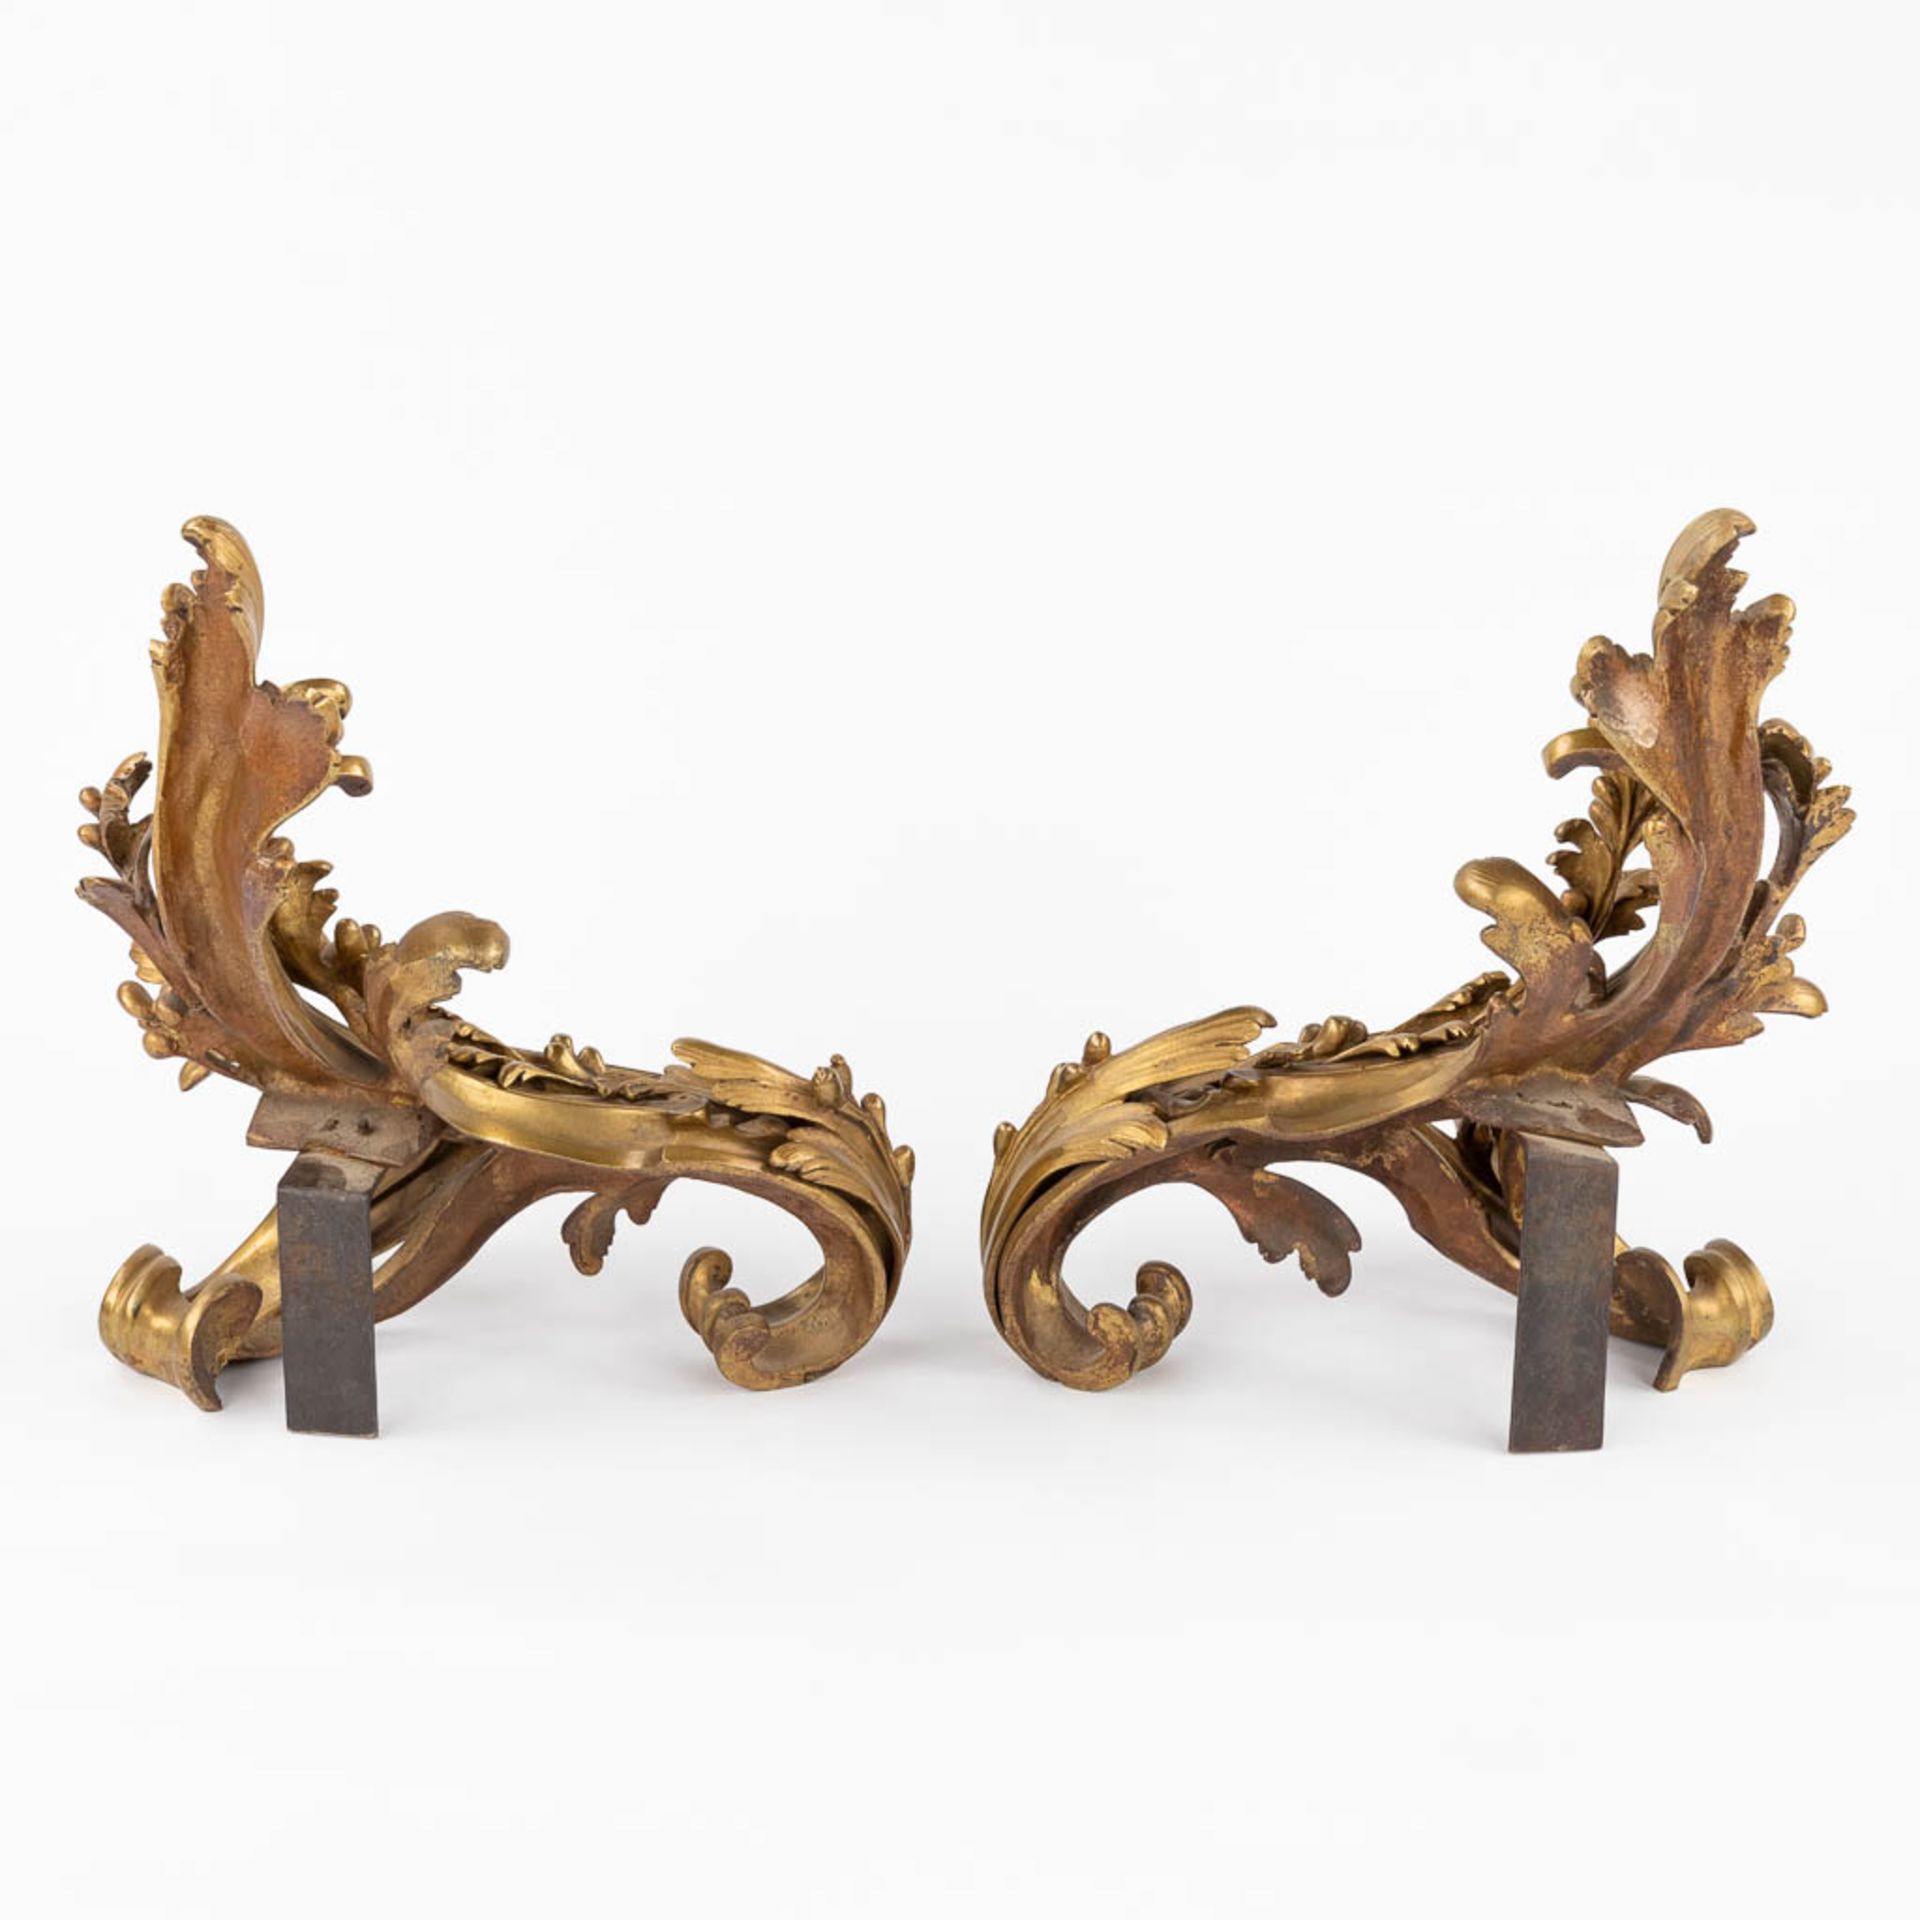 A pair of fireplace bucks, bronze in Louis XV style. 19th C. (W:31 x H:36 cm) - Image 5 of 10